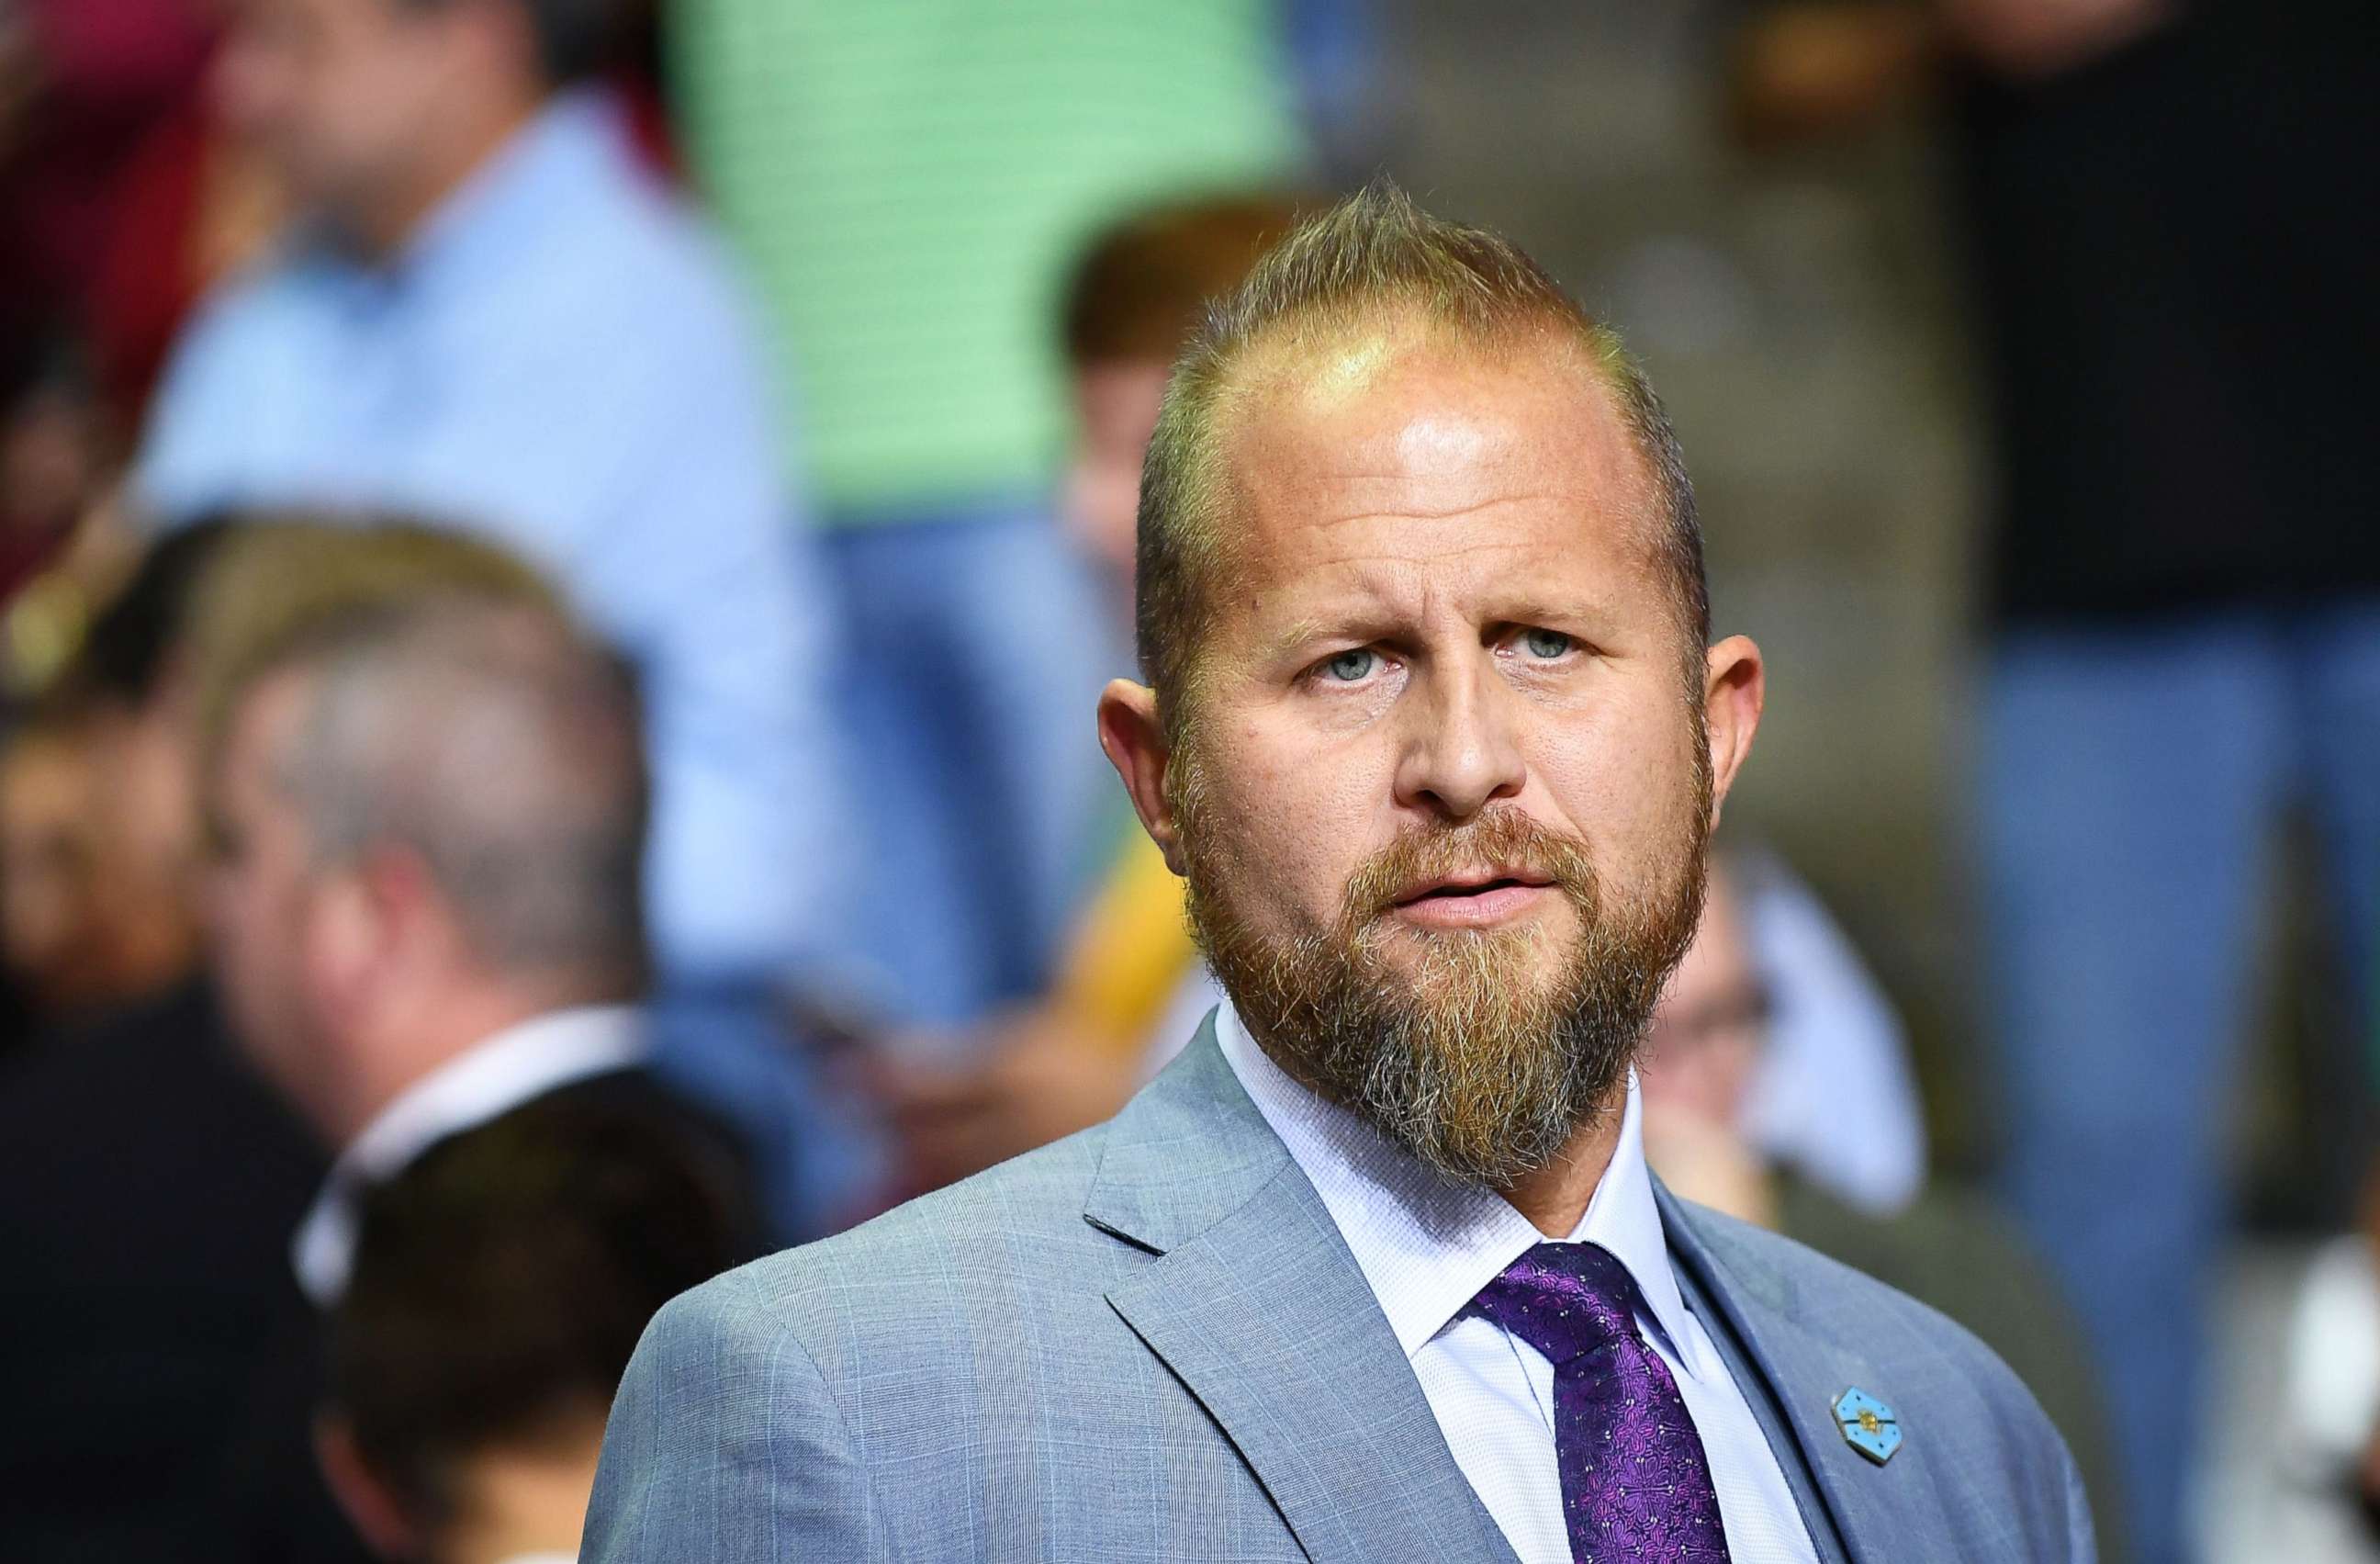 PHOTO: In this file photo taken on Oct. 2, 2018, Trump 2020 campaign manager Brad Parscale is seen before the start of a rally by President Donald Trump at Landers Center in Southaven, Miss.